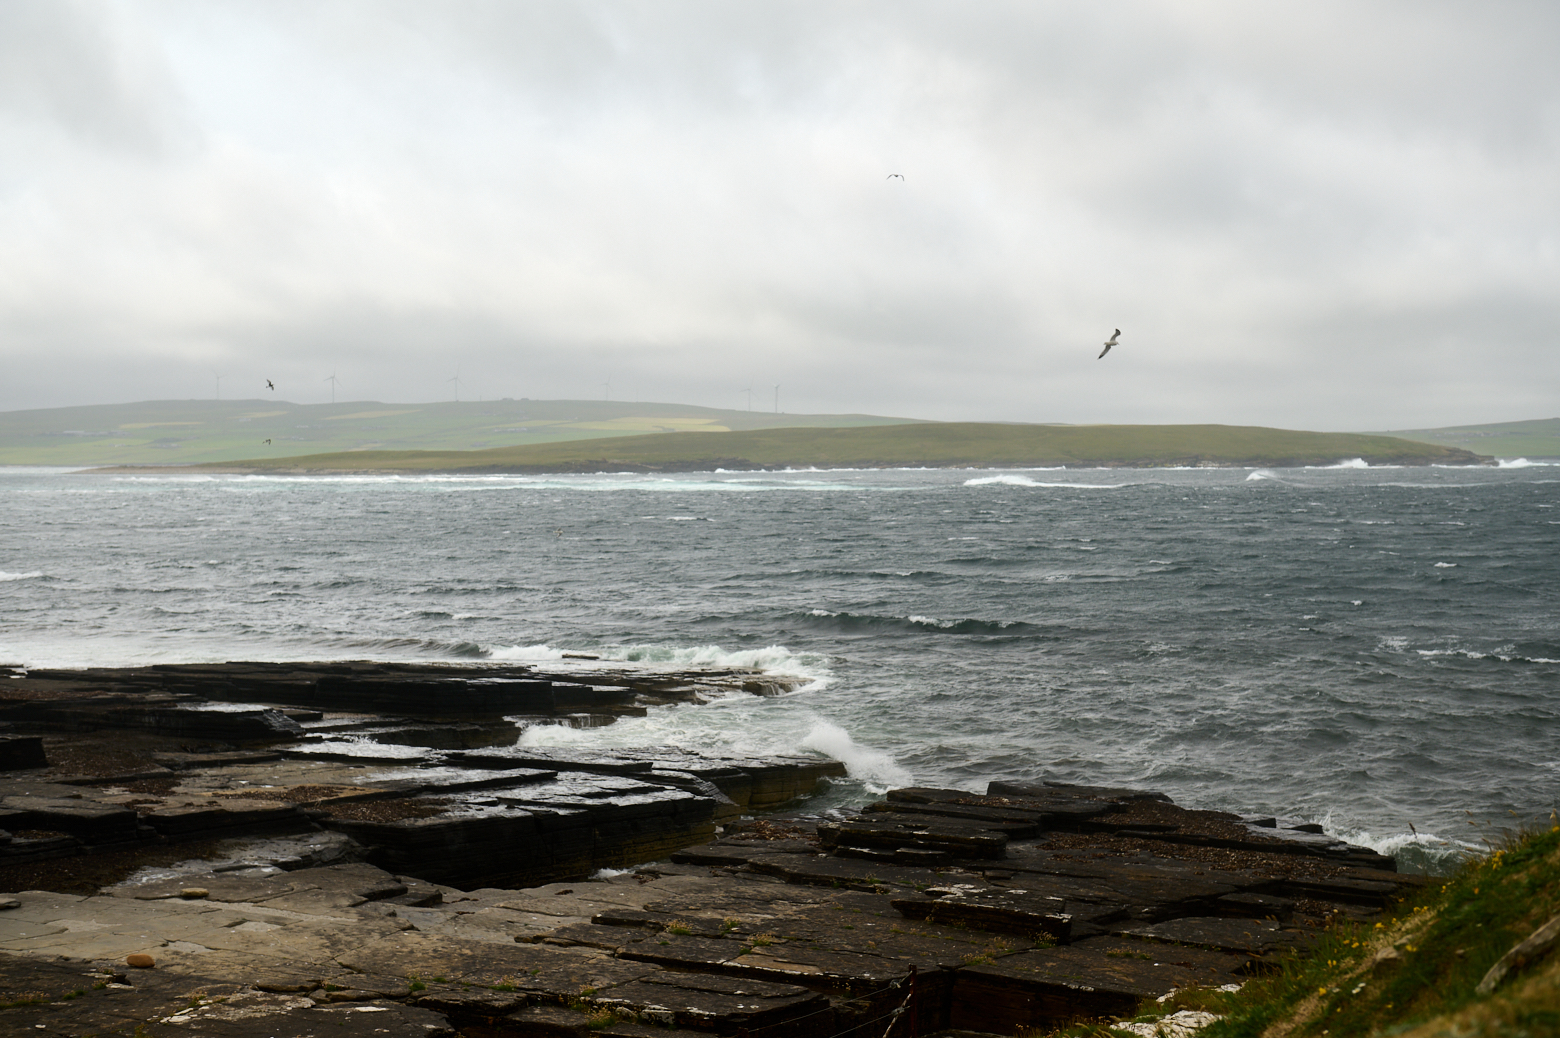 Exploring Rousay and the Midhowe Cairn & Broch in Orkney.